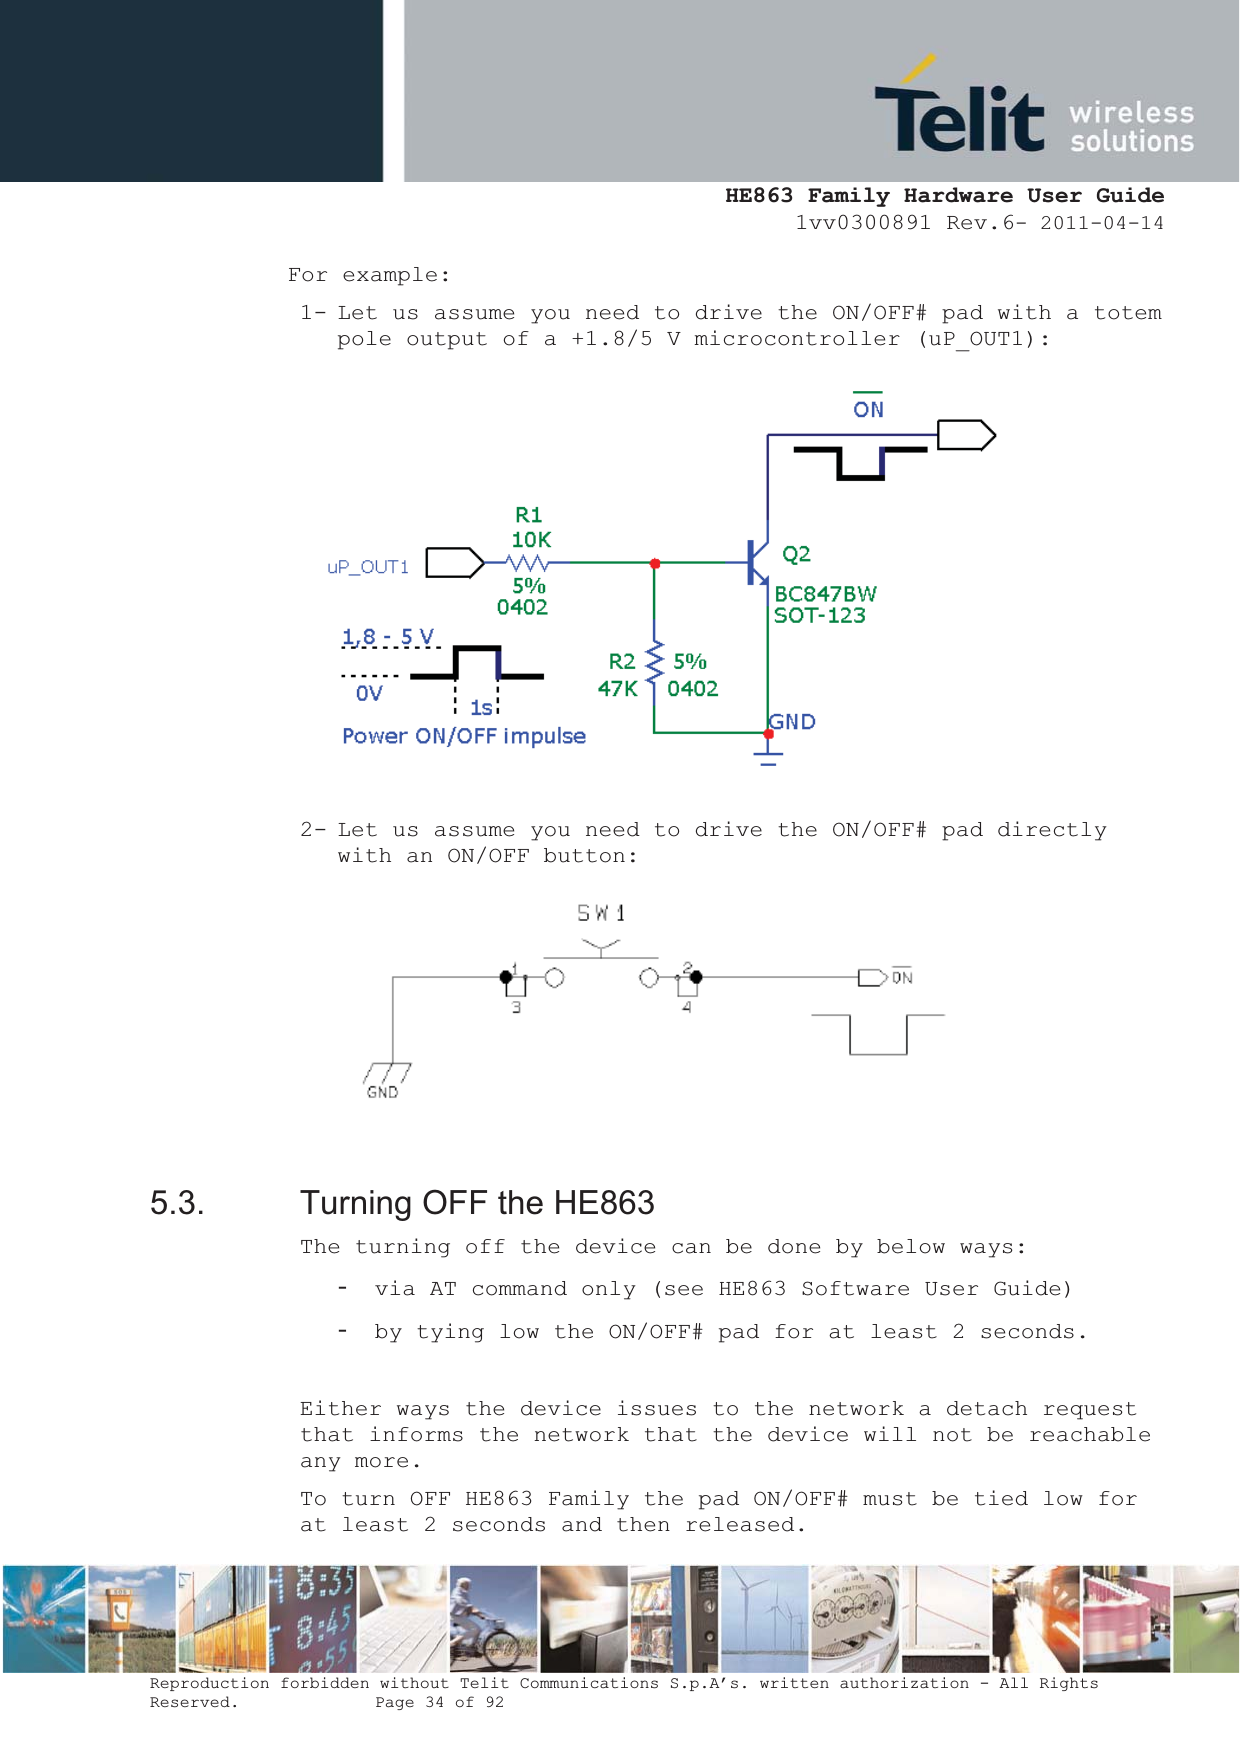  HE863 Family Hardware User Guide 1vv0300891 Rev.6- 2011-04-14    Reproduction forbidden without Telit Communications S.p.A’s. written authorization - All Rights Reserved.    Page 34 of 92  For example: 1- Let us assume you need to drive the ON/OFF# pad with a totem pole output of a +1.8/5 V microcontroller (uP_OUT1):  2- Let us assume you need to drive the ON/OFF# pad directly with an ON/OFF button:   5.3.  Turning OFF the HE863 The turning off the device can be done by below ways: - via AT command only (see HE863 Software User Guide) - by tying low the ON/OFF# pad for at least 2 seconds.  Either ways the device issues to the network a detach request that informs the network that the device will not be reachable any more. To turn OFF HE863 Family the pad ON/OFF# must be tied low for at least 2 seconds and then released. 